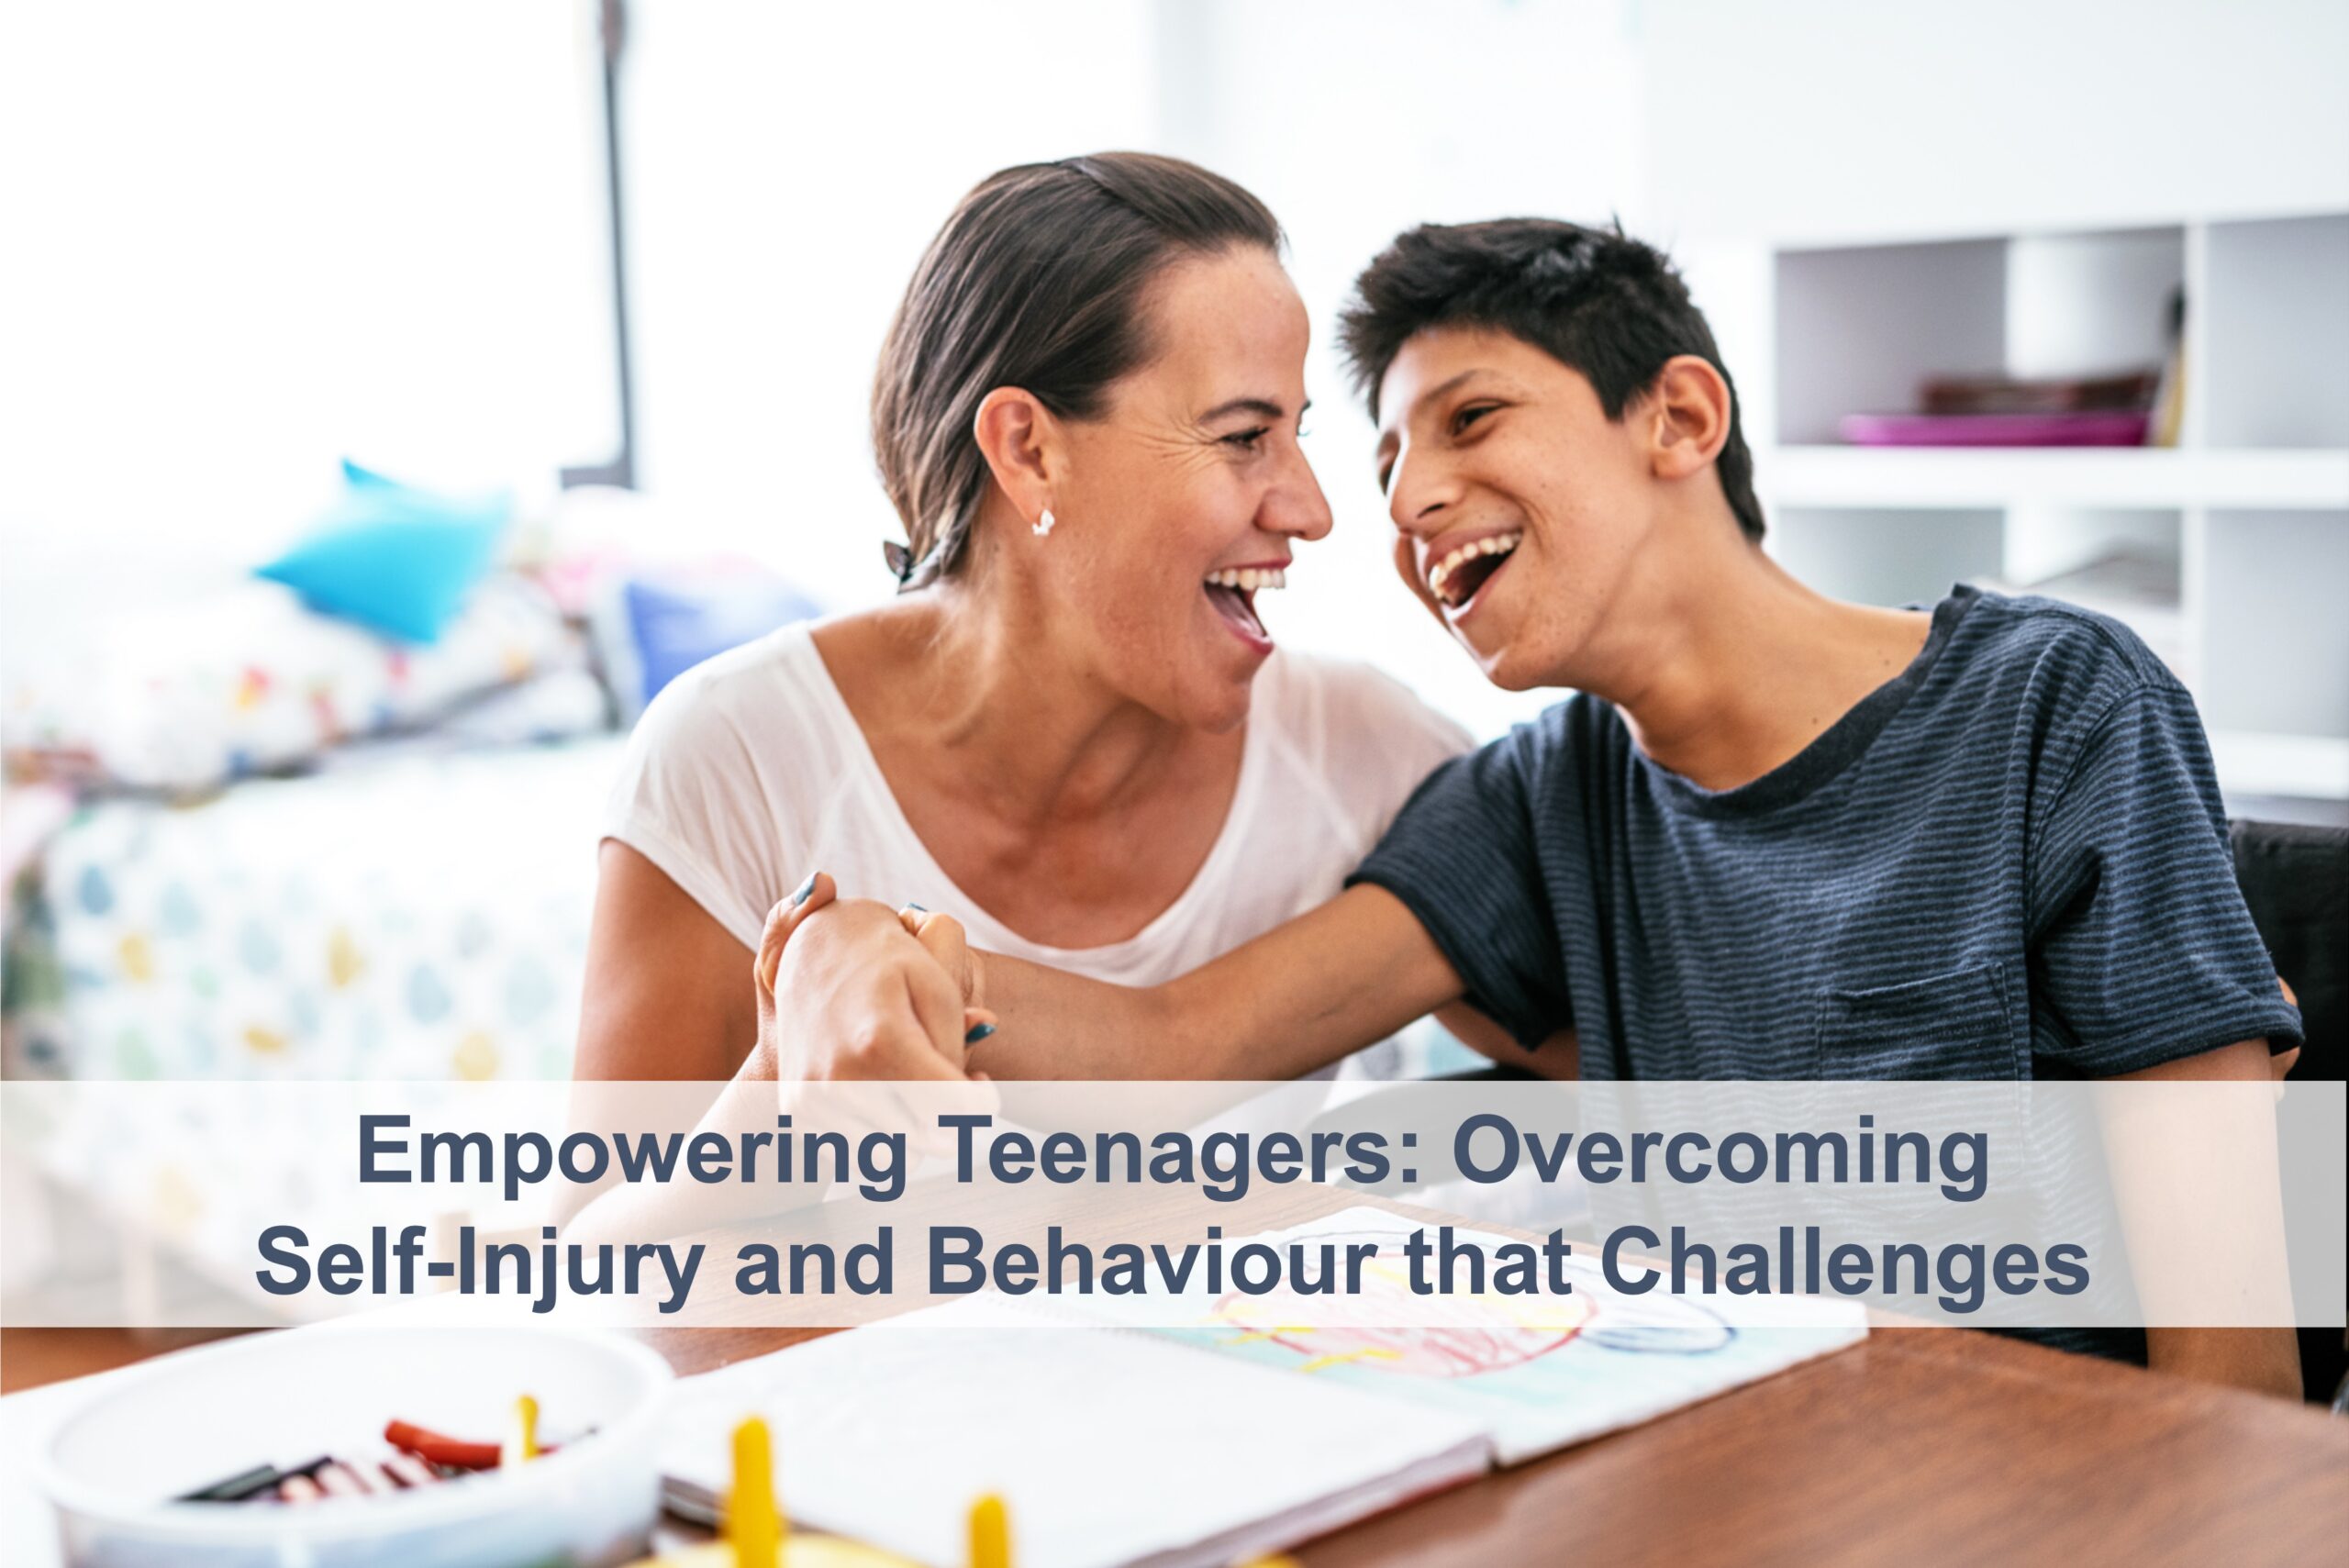 Empowering Teenagers: Overcoming Self-Injury and Behaviour that Challenges